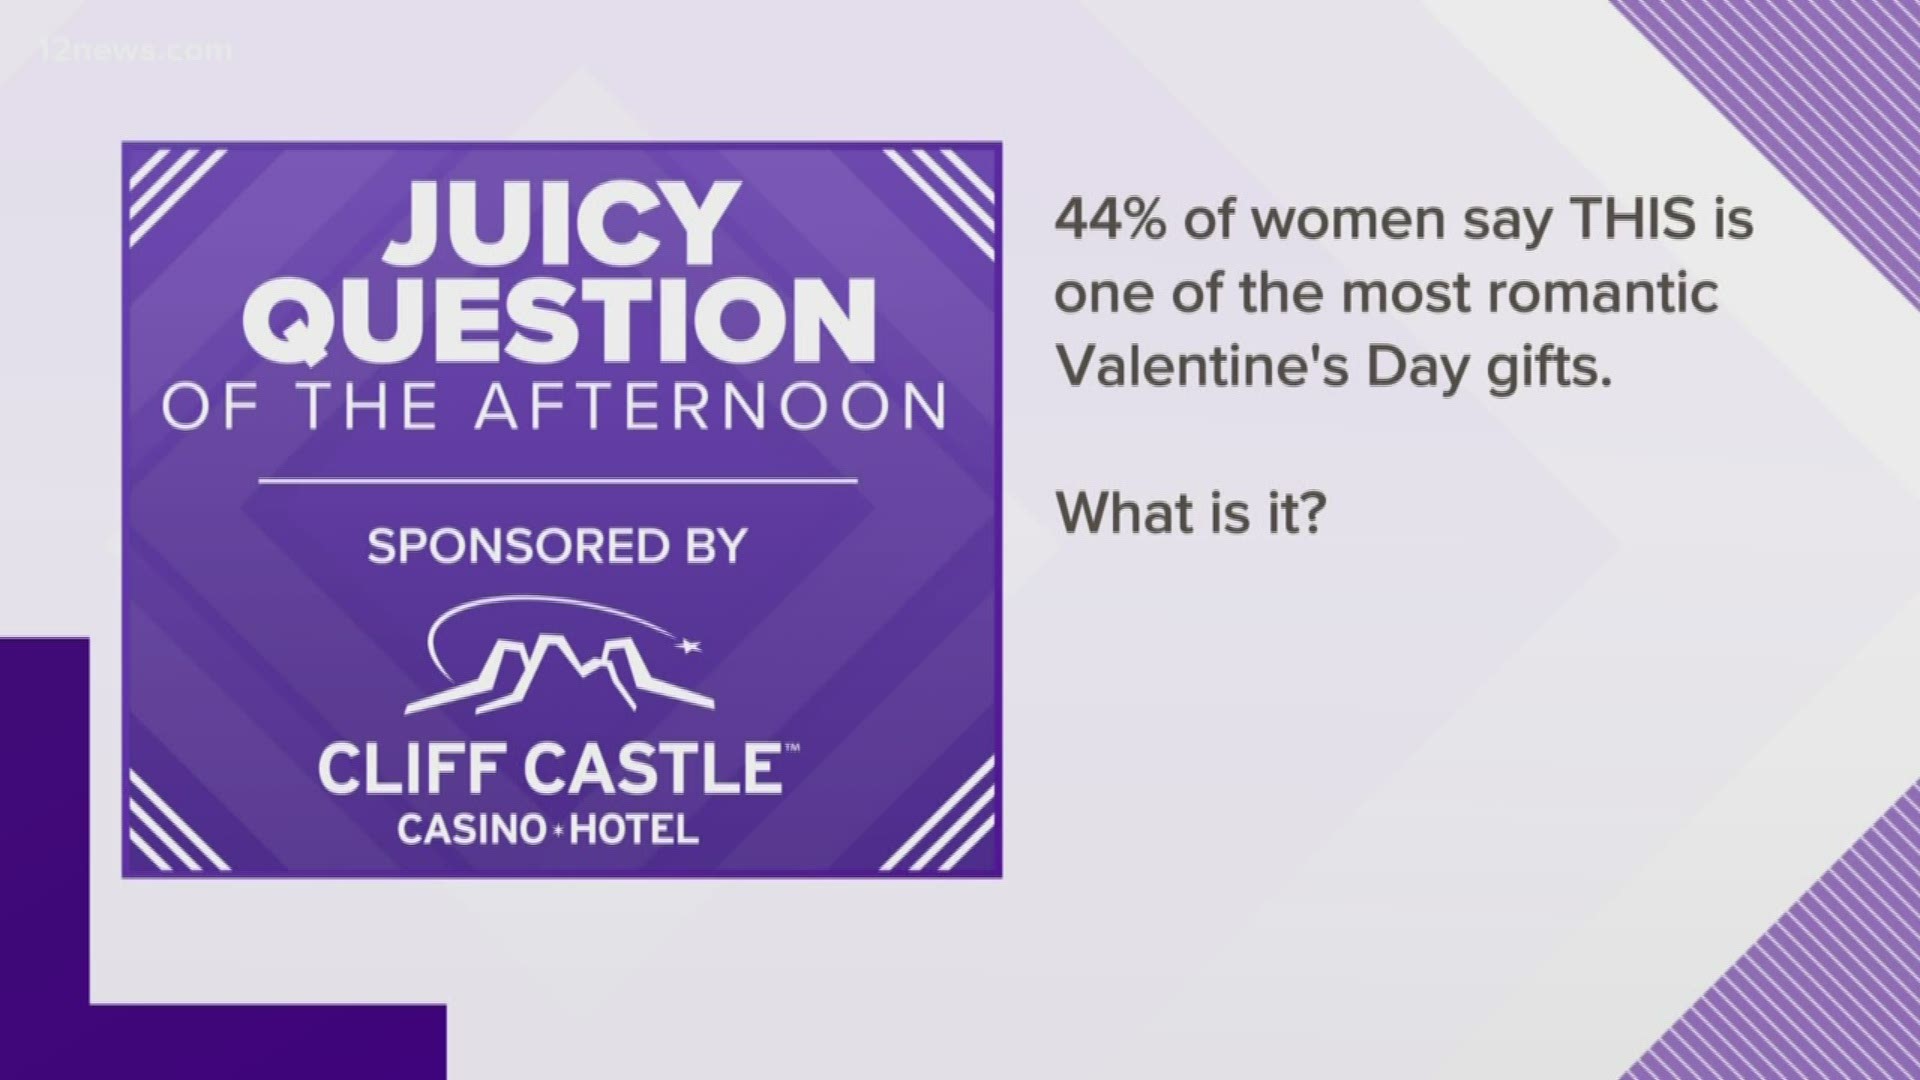 44% of women say THIS is one of the most romantic Valentine's Day gifts they could receive. What is it?